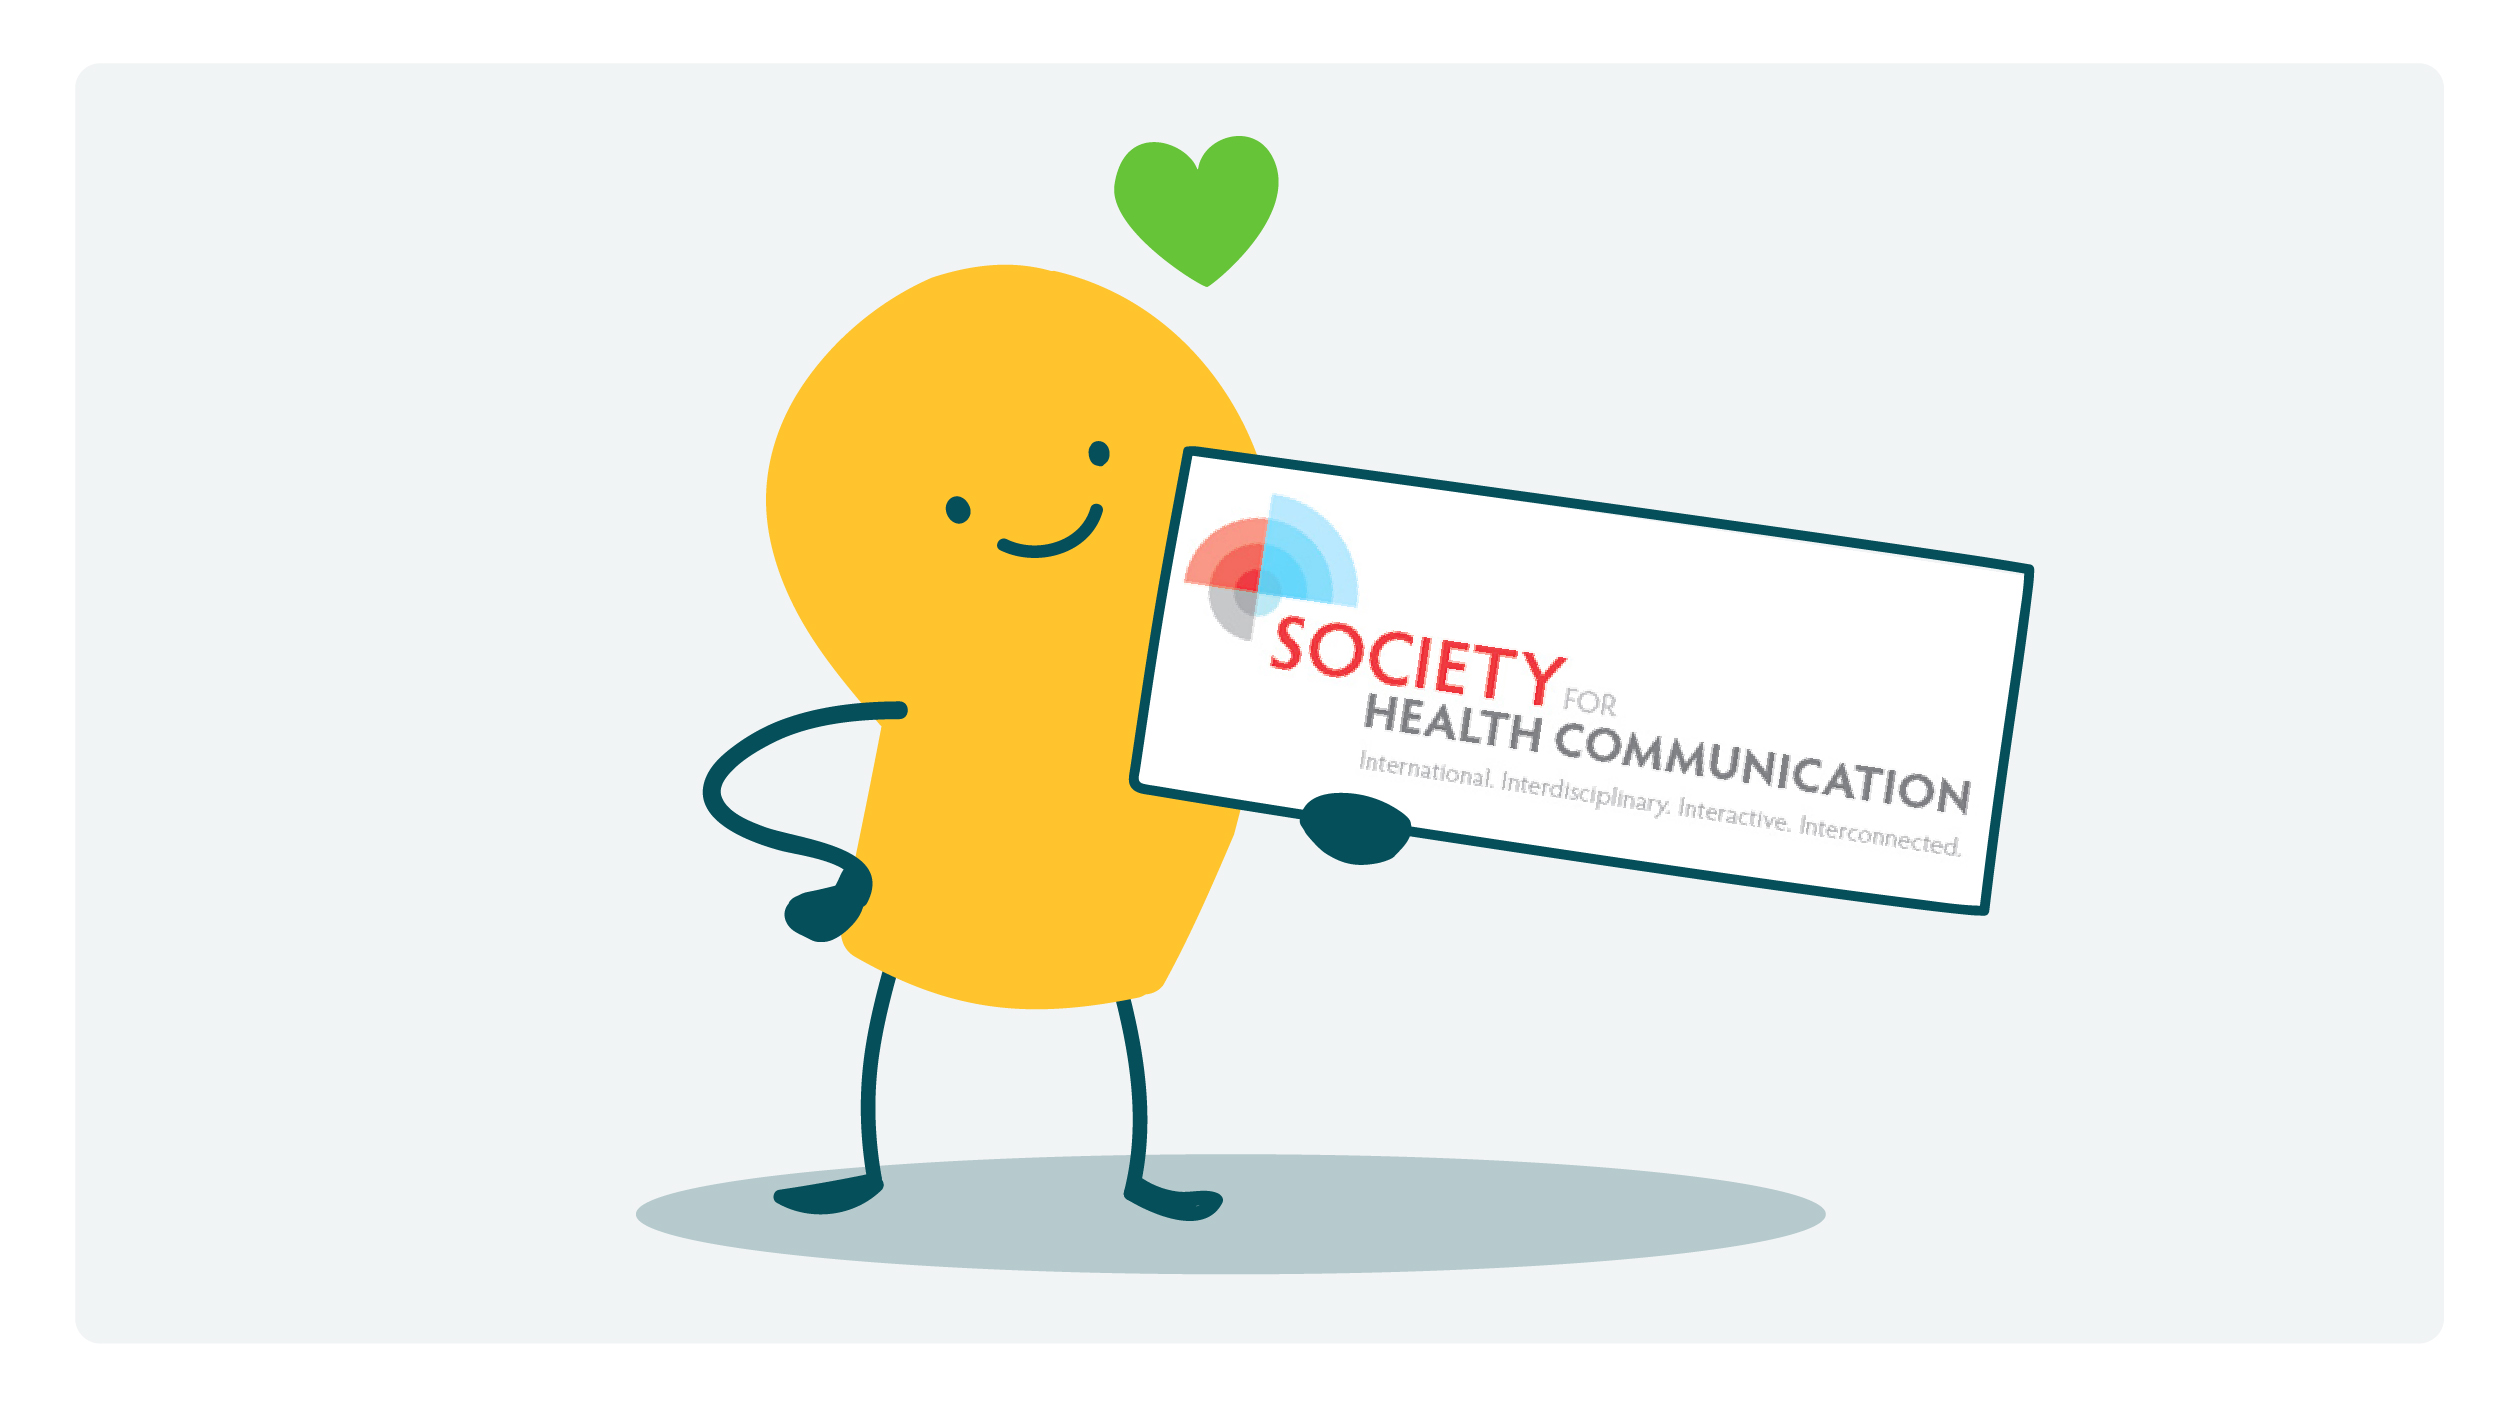 A doodle holds up a sign with the Society for Health Communication logo.